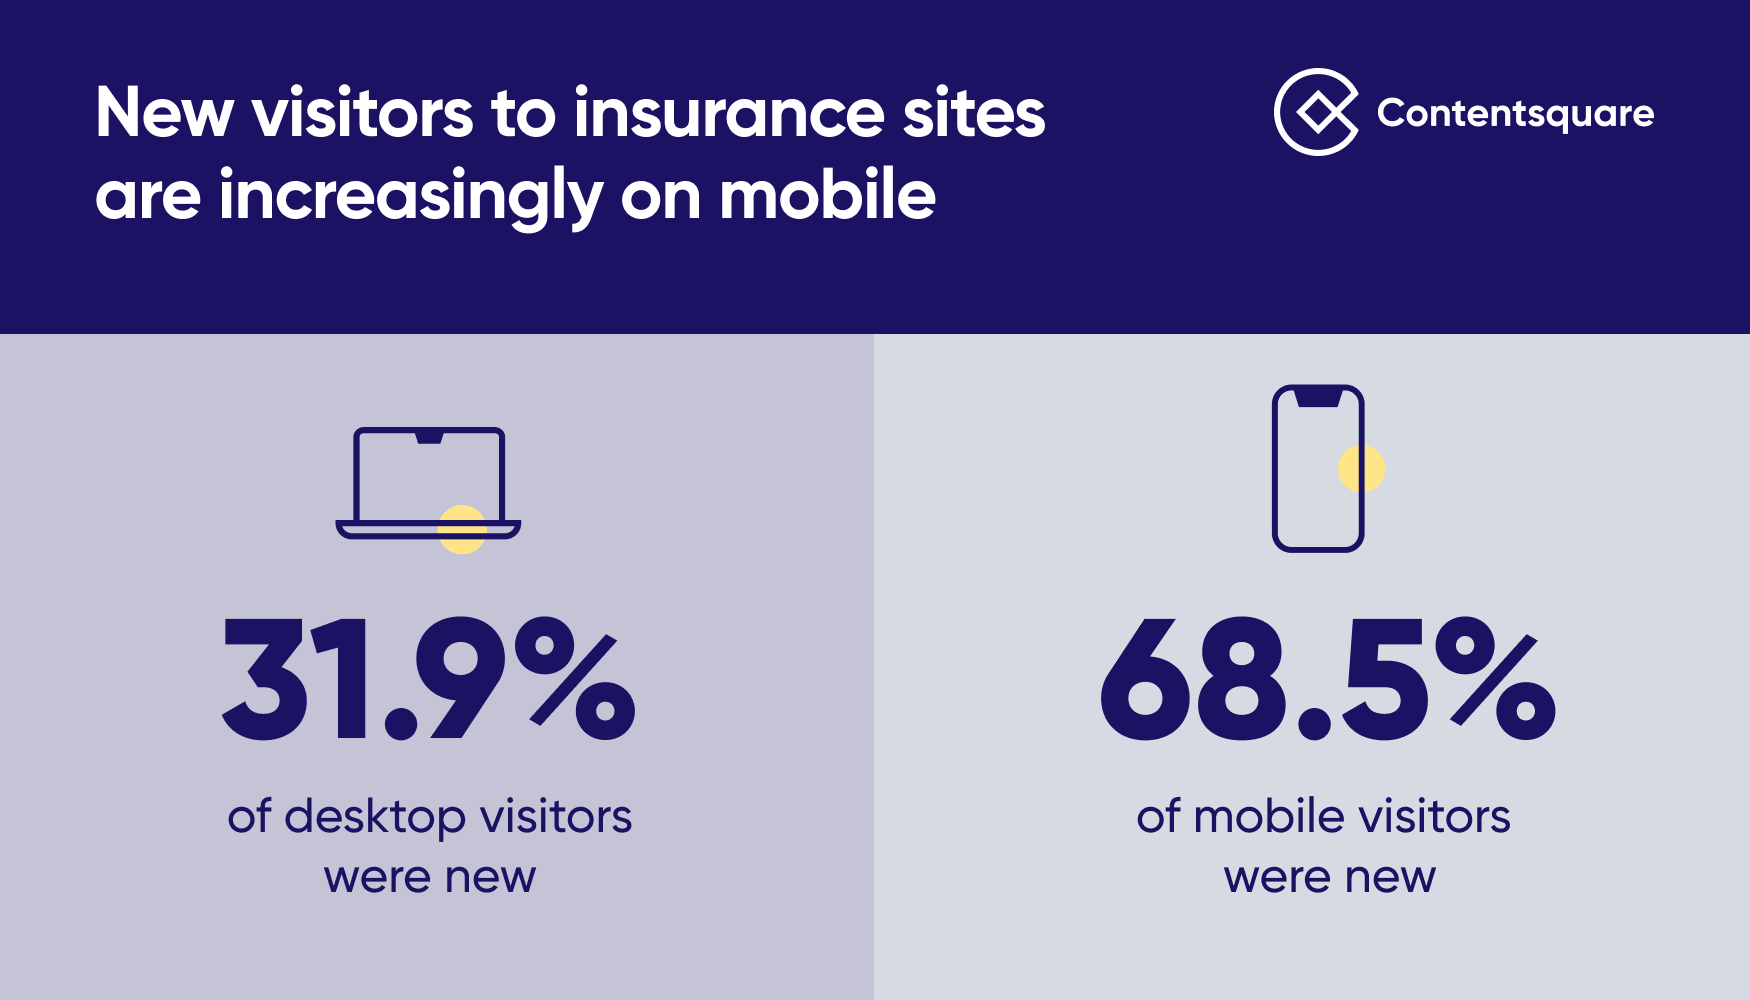 The insurance customer experience must serve an increasingly mobile audience